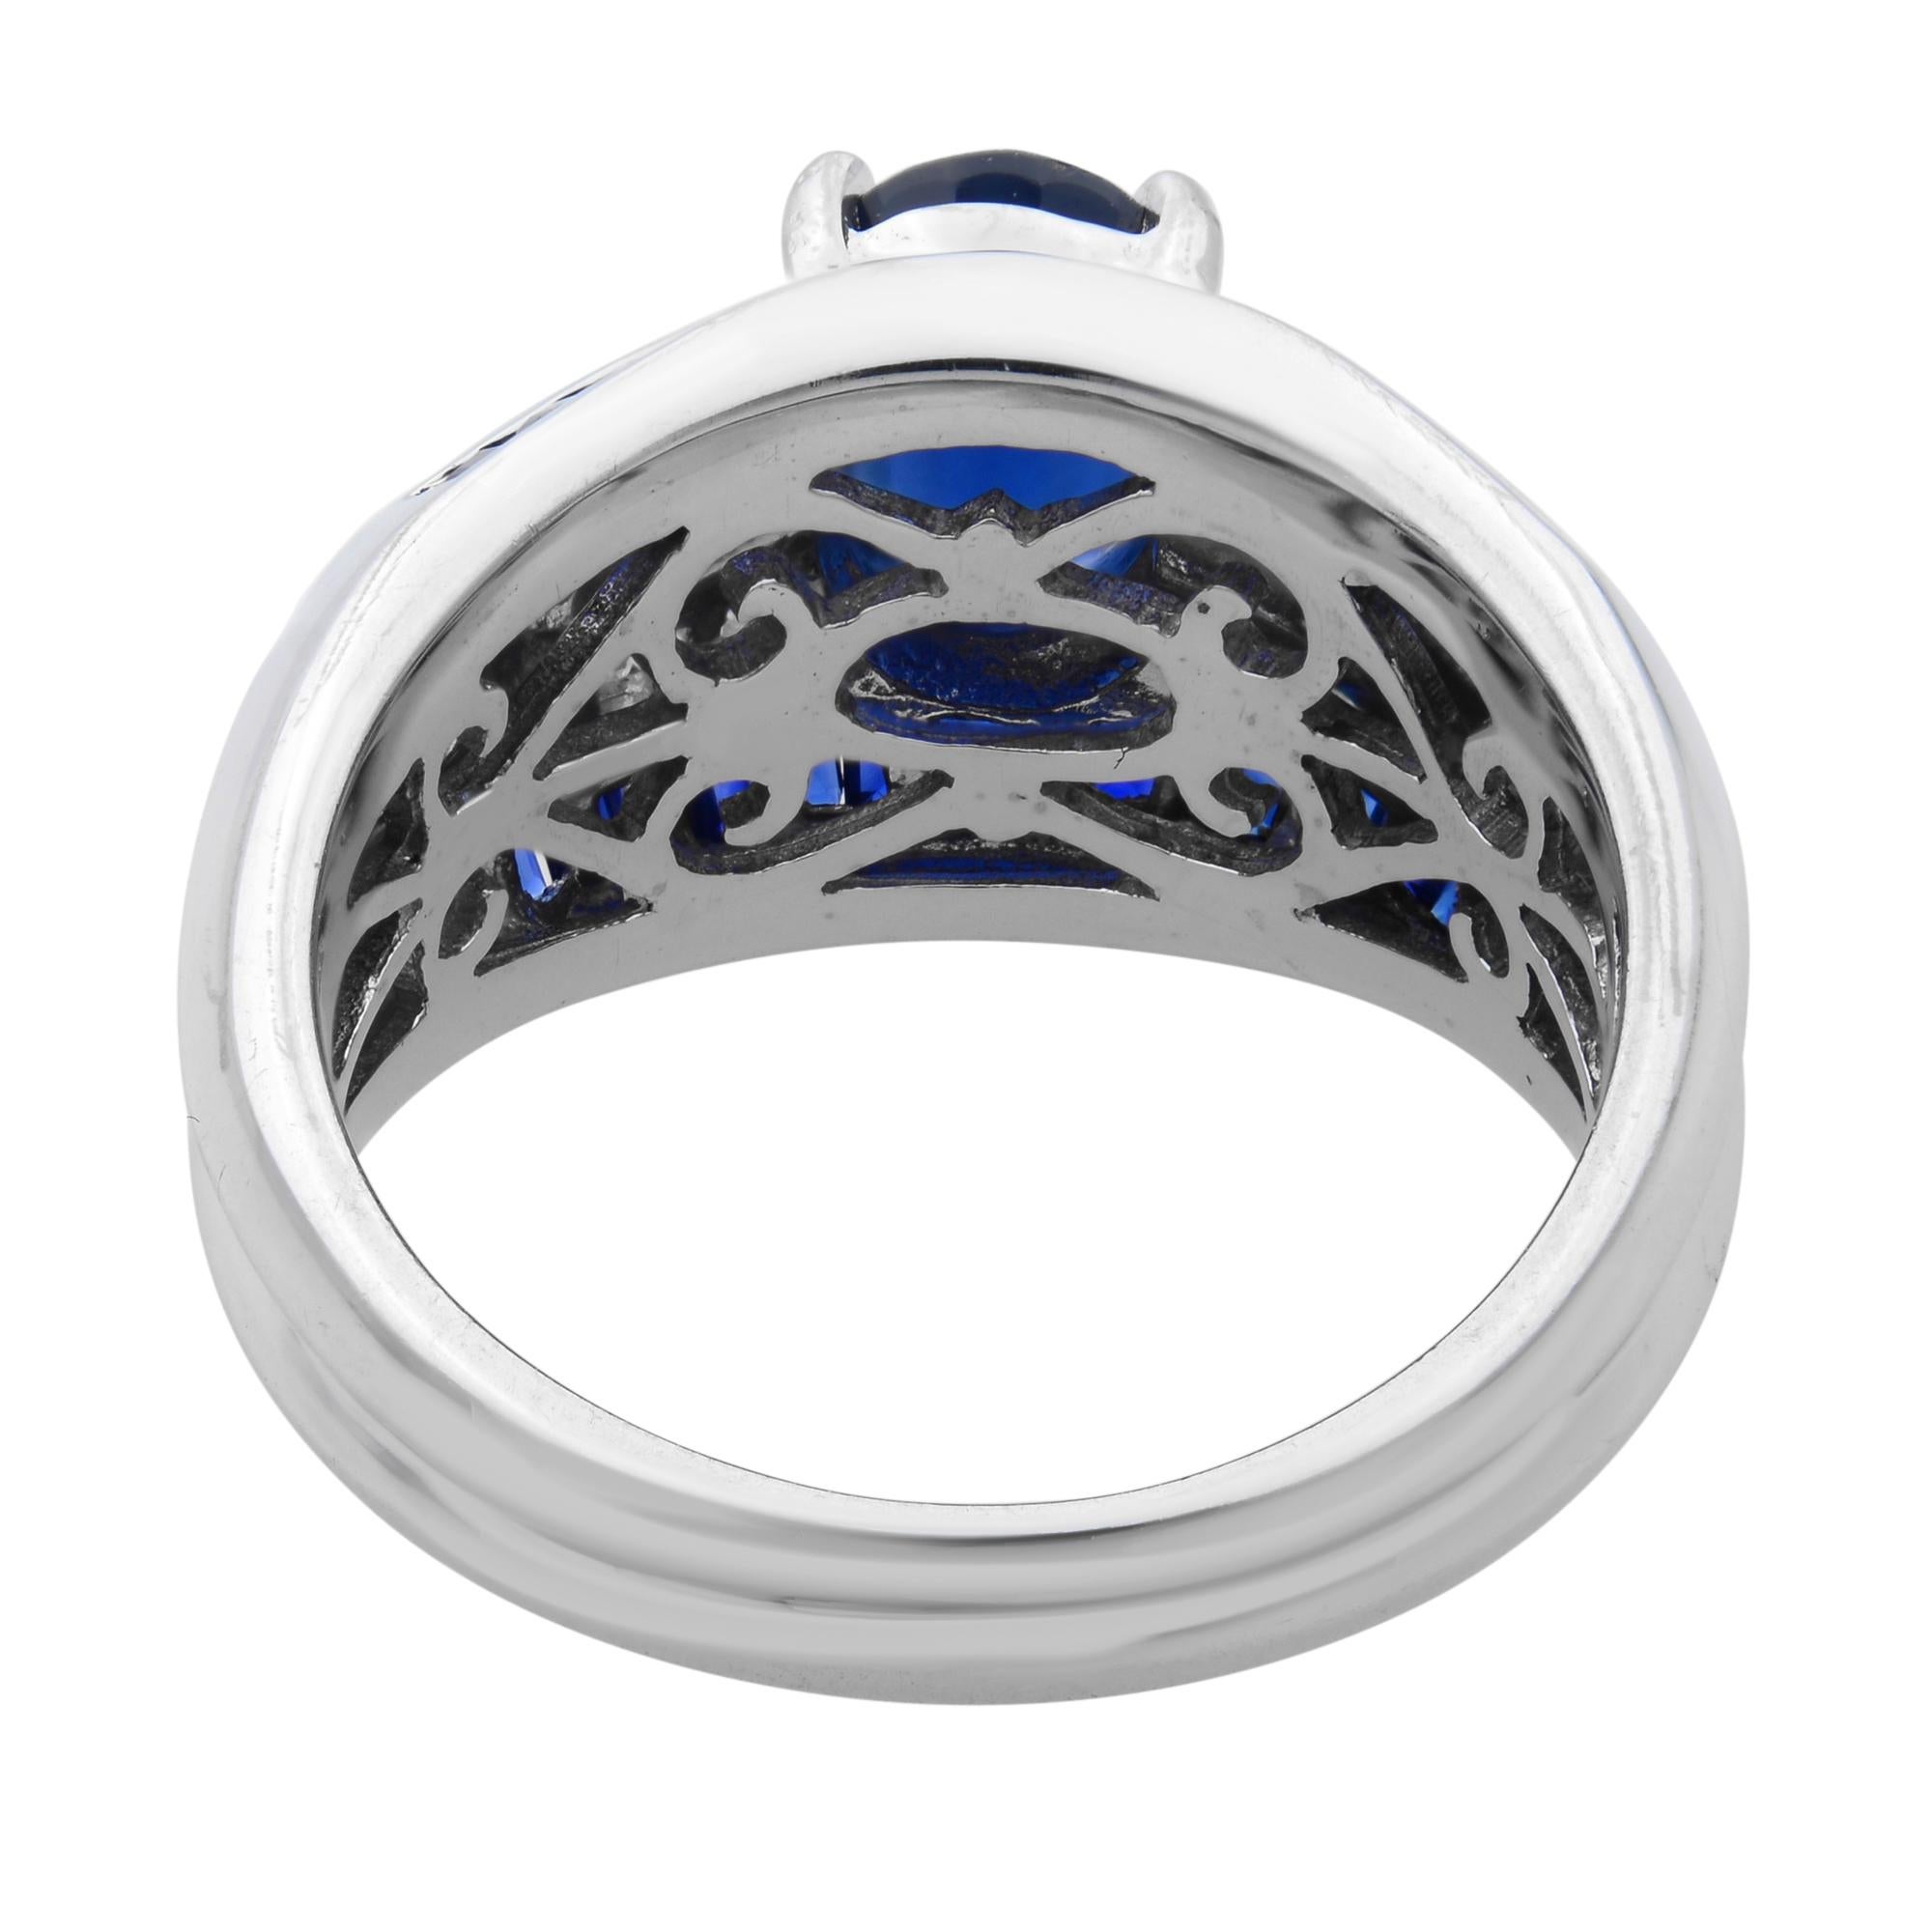 Oval Cut 2.70Cttw Blue Sapphire & 0.45Cttw Diamond Cocktail Ring 14K White Gold For Sale